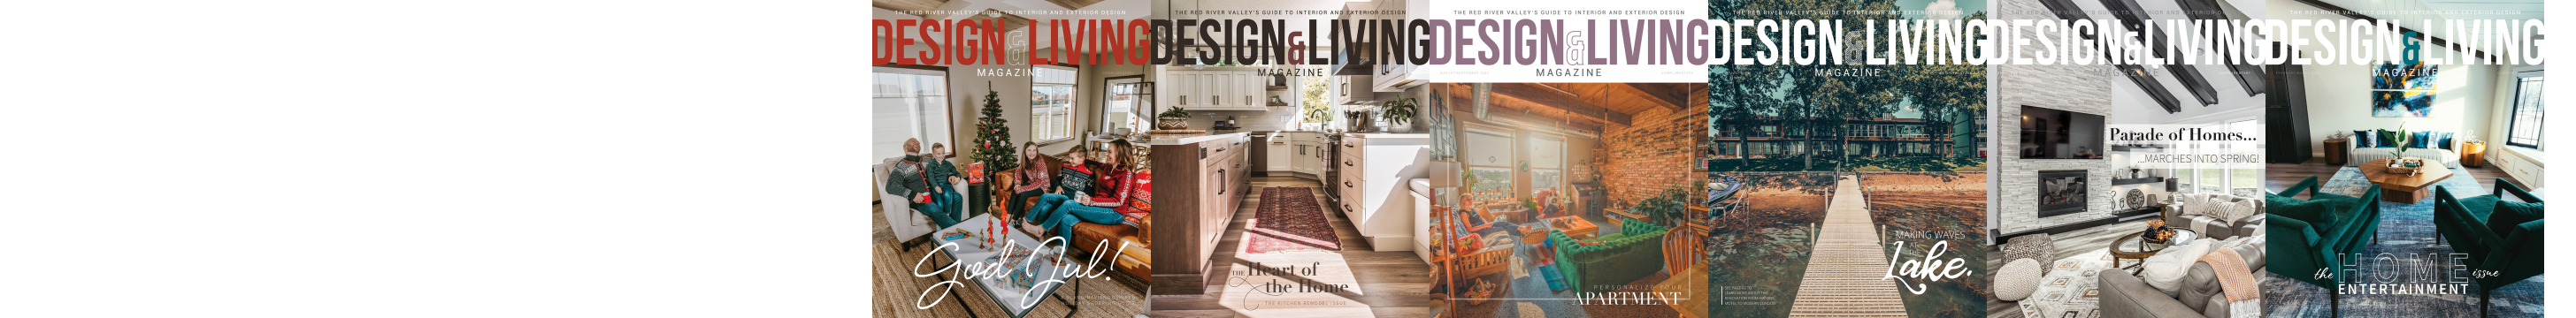 Design and Living Cover Photo